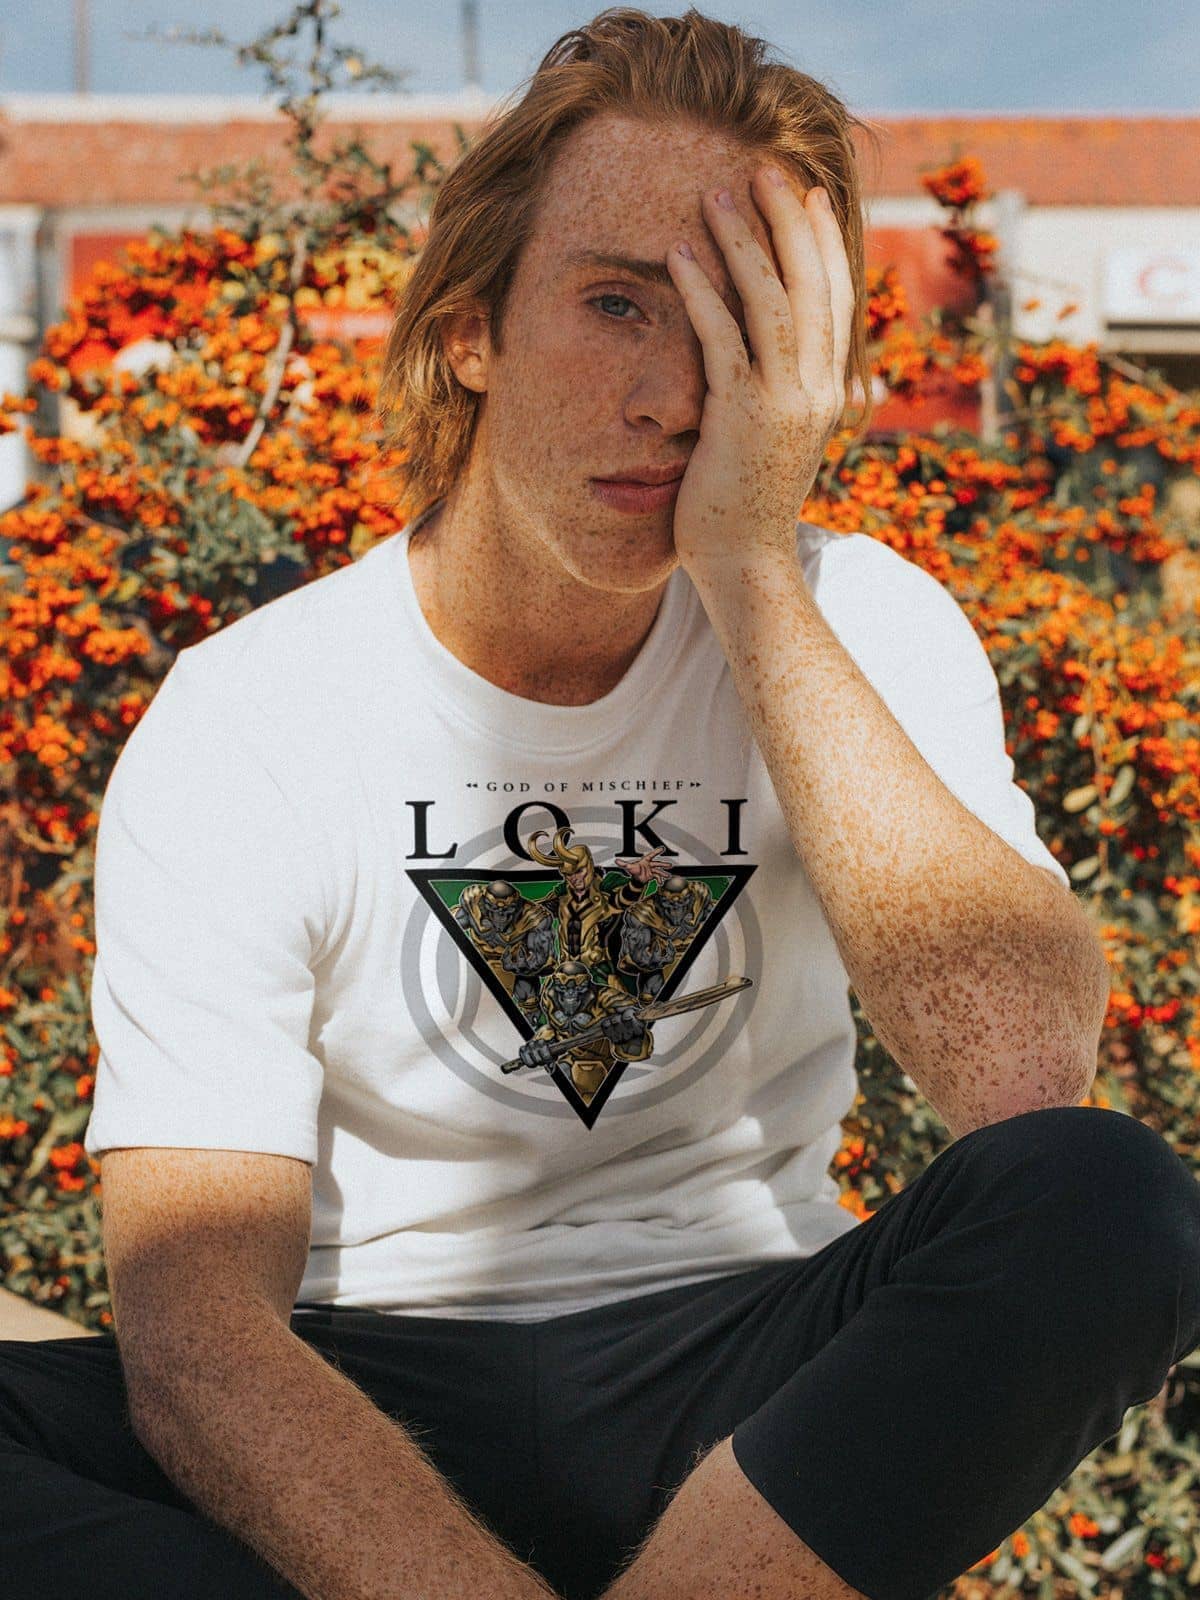 Loki The God Of Mischief Exclusive T Shirt for Comic Book Fans | Premium Design | Catch My Drift India - Catch My Drift India  clothing, general, loki, made in india, marvel, movies, shirt, s